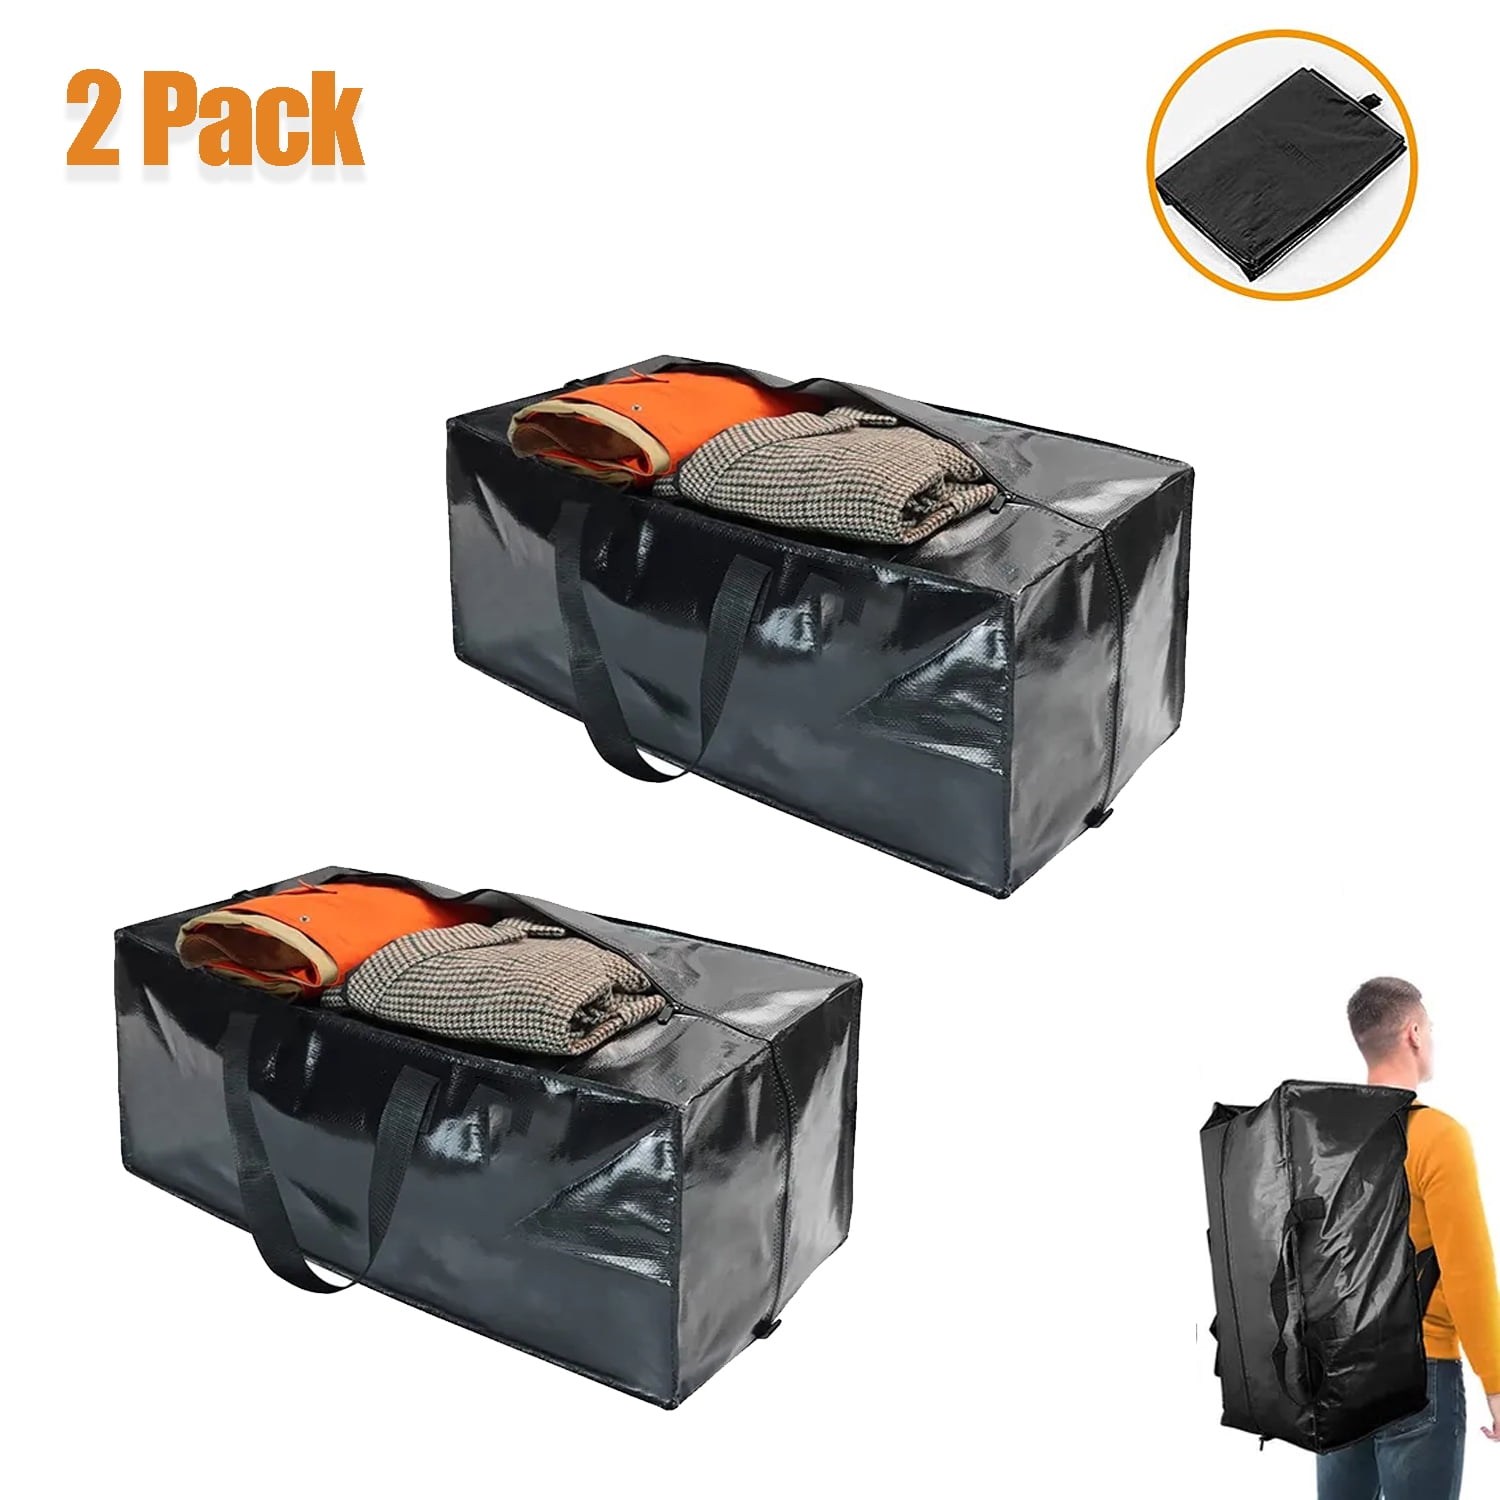 iMounTEK 4pcs Moving Bags Heavy Duty Container Reusable Plastic Totes Blue Moving Bin Zippered Storage Bag, Size: Large